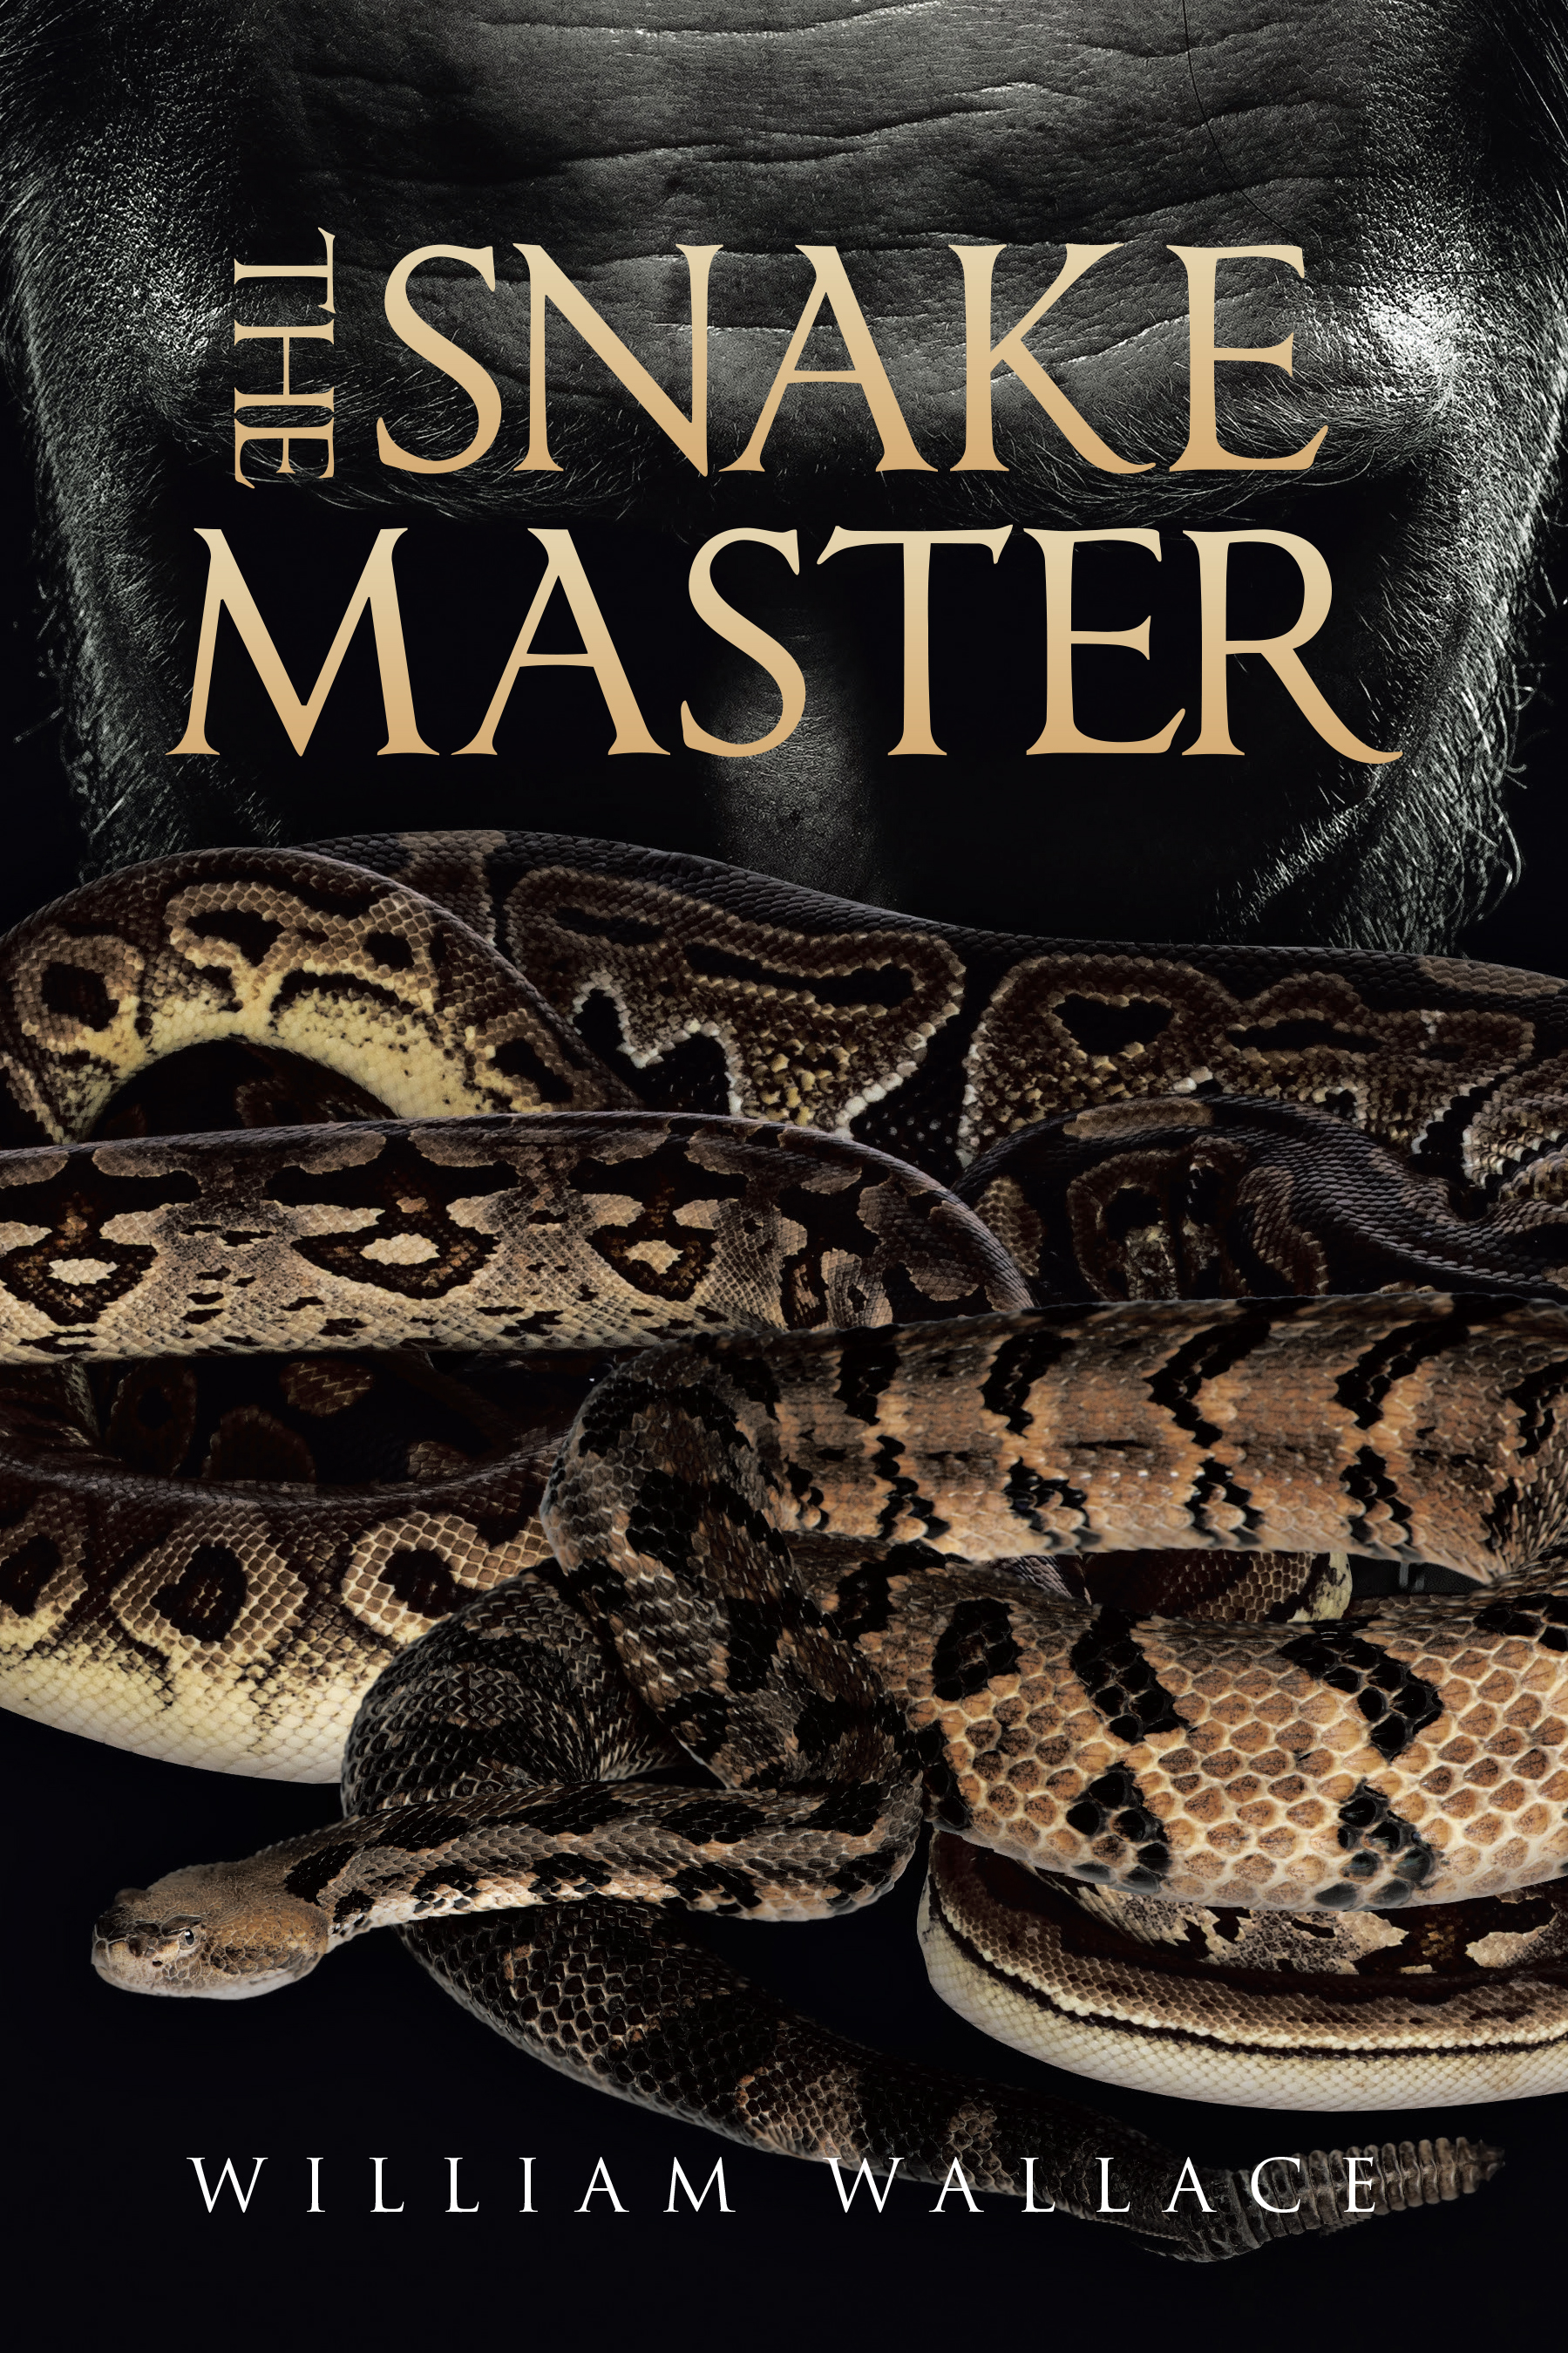 Author William Wallace’s New Book, "The Snake Master," is a Chilling Novel That Follows the Heart Pounding Investigation of Several Similar Murders